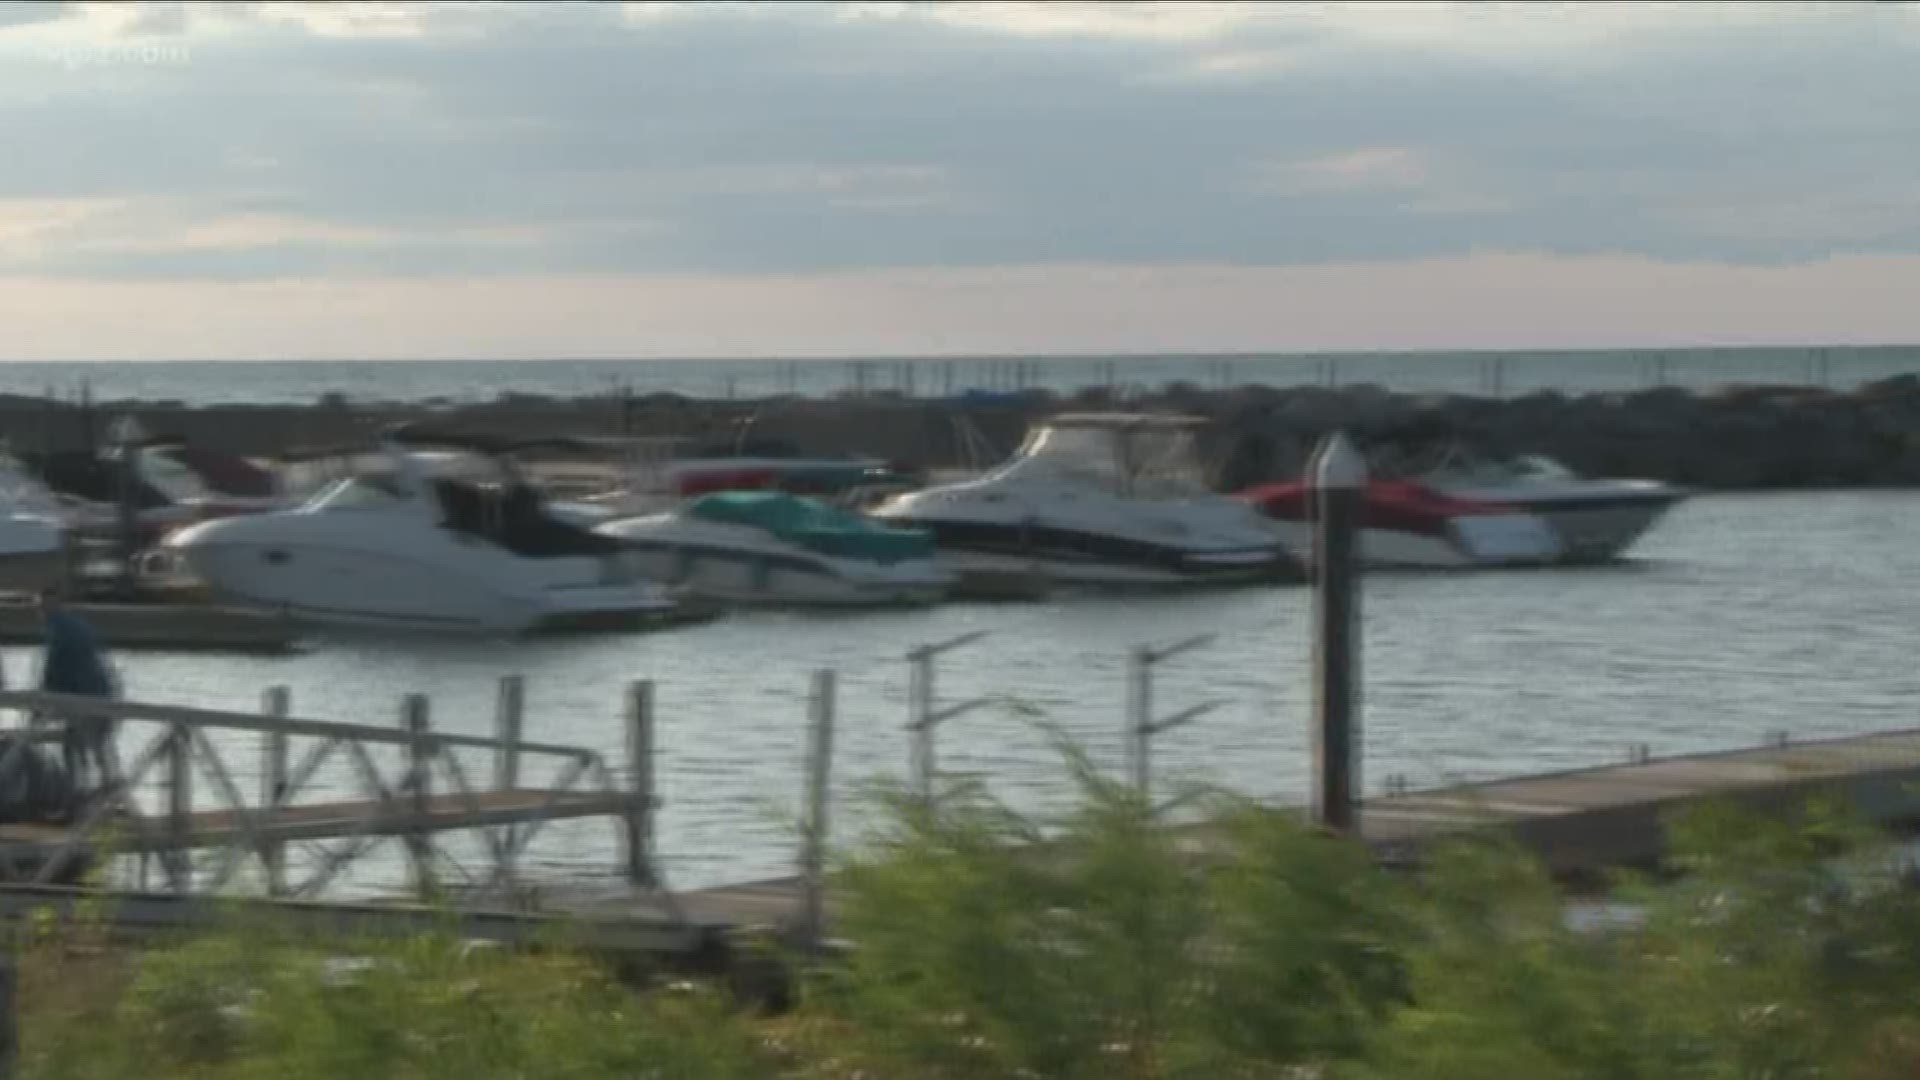 The Evans Town Supervisor says the need for repairs at the Sturgeon Point Marina is crucial and now they finally have the funding to make improvements.